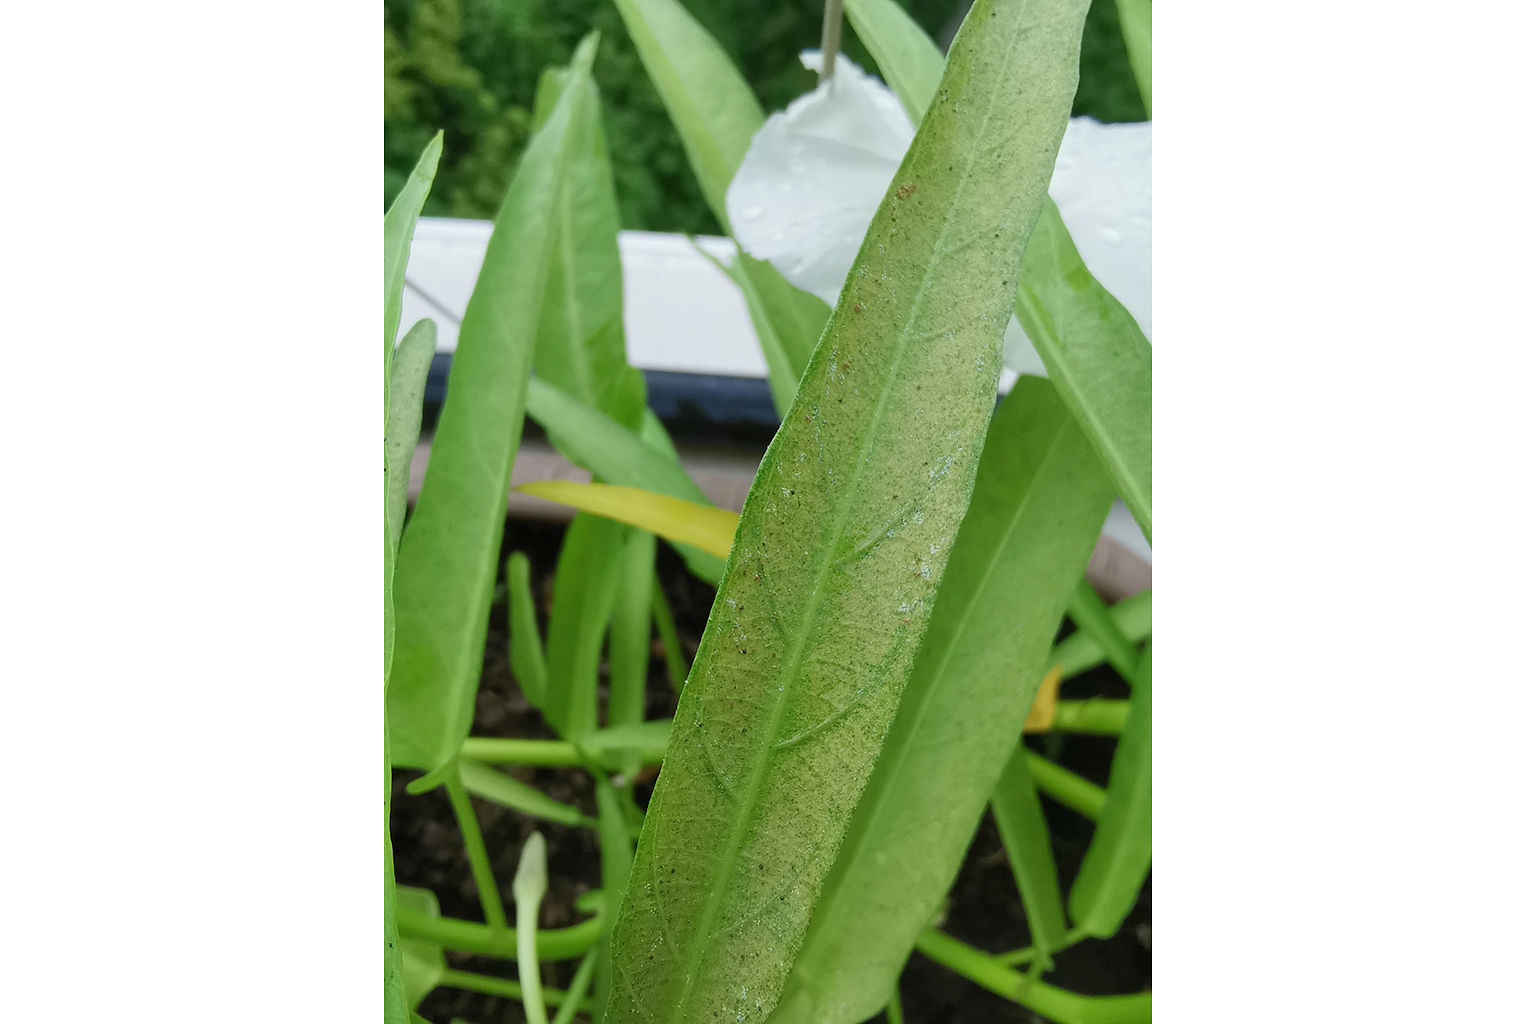 Kangkong is infested with spider mites.